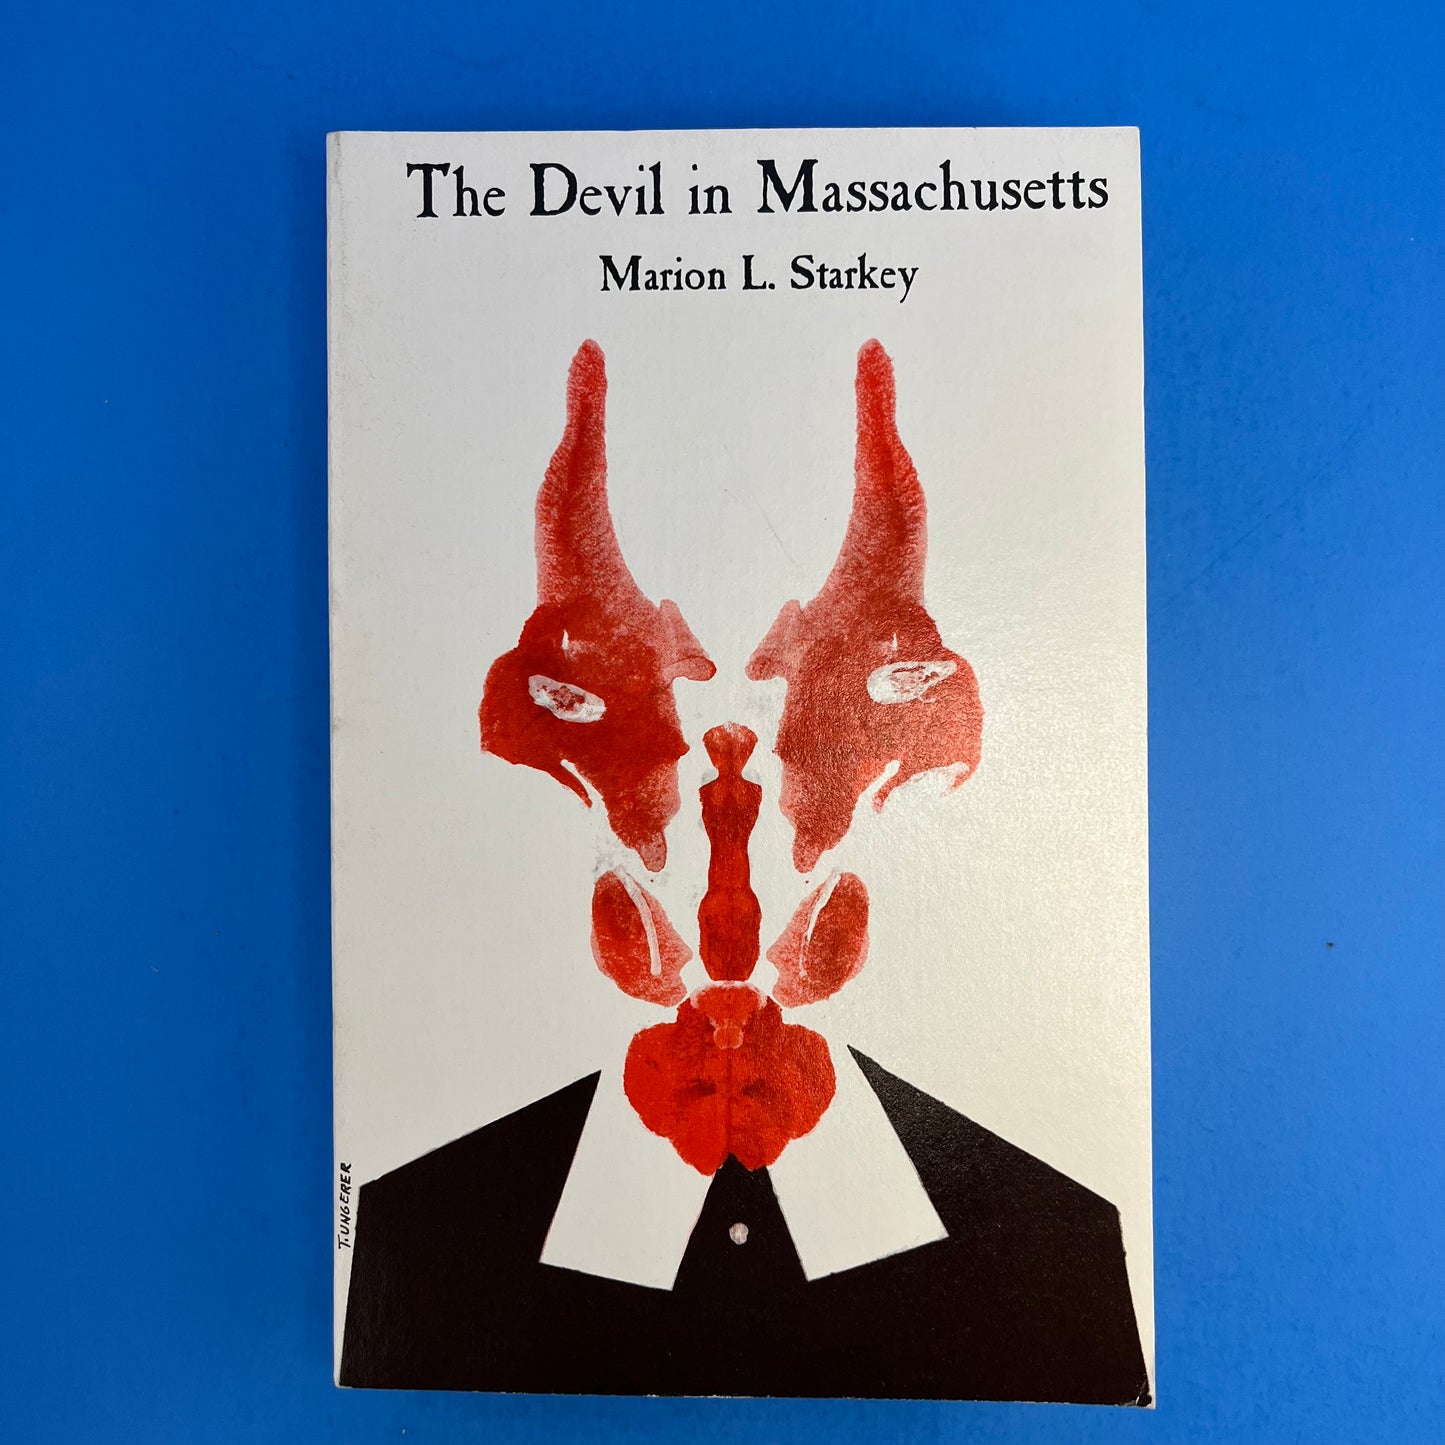 The Devil in Massachusetts: A Modern Inquiry into the Salem Witch Trials